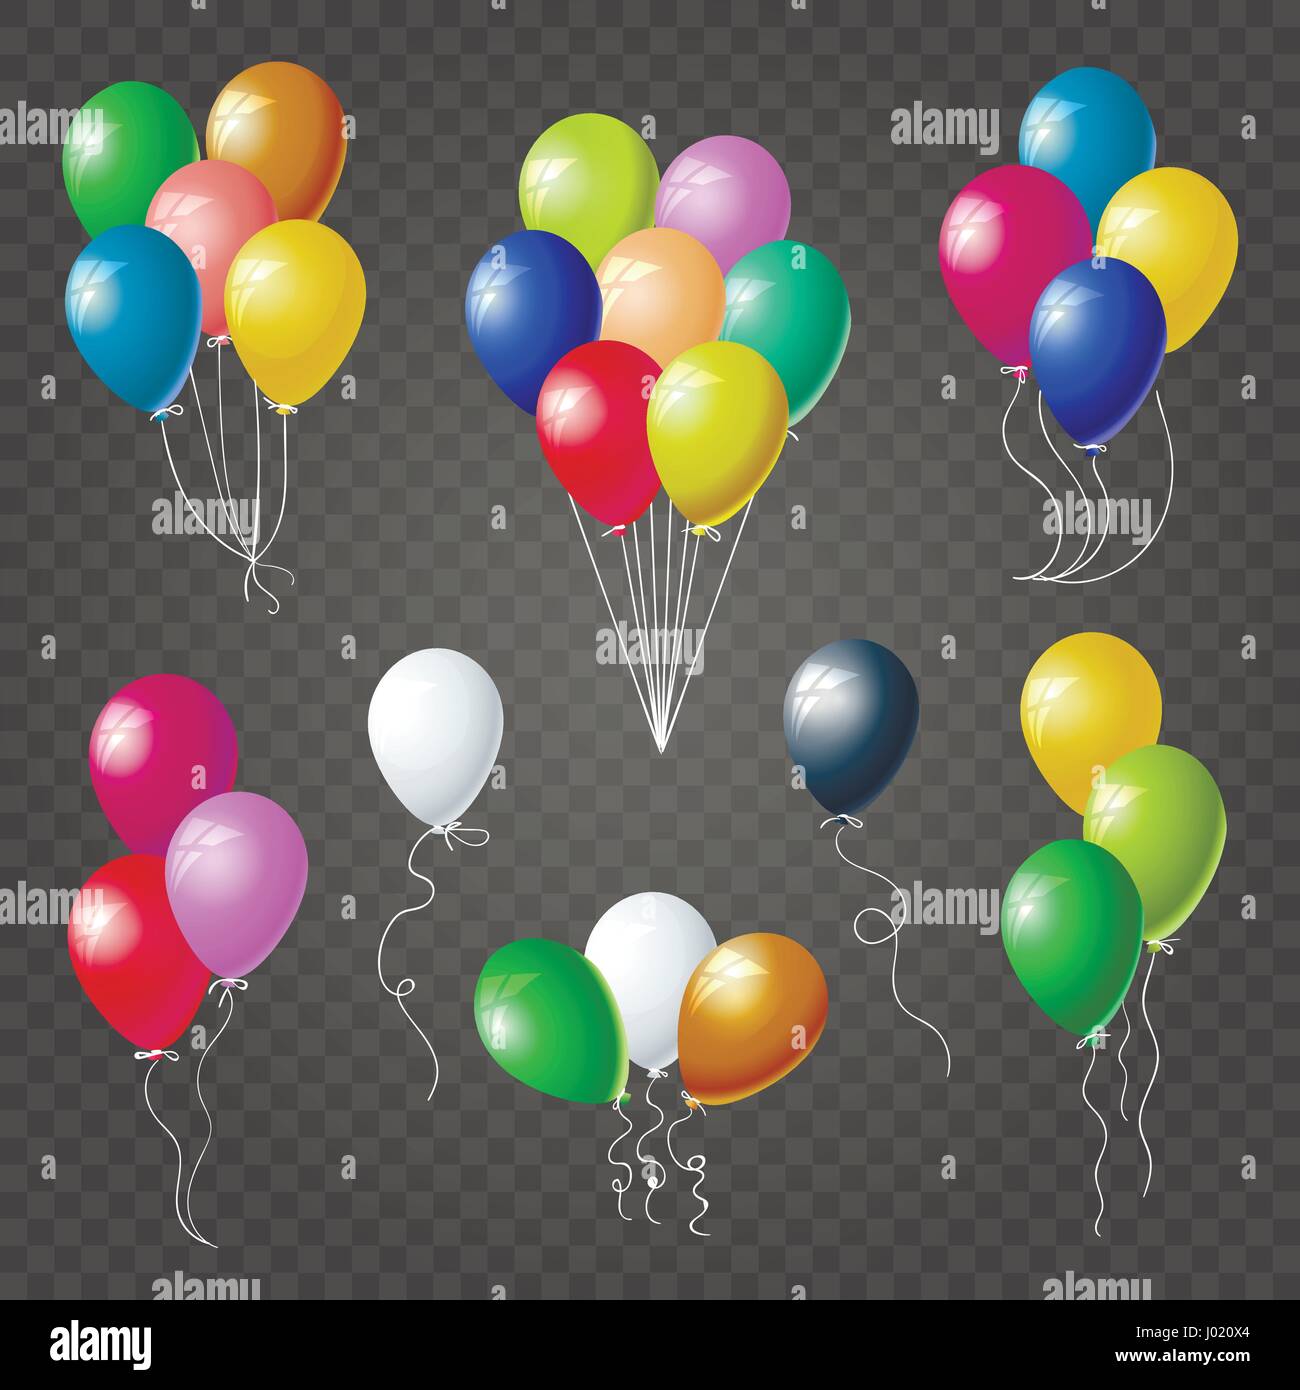 Set of flying colorful helium balloons. Festive decoration elements for birthday, holiday, anniversary, celebration design. Isolated on transparent ba Stock Vector